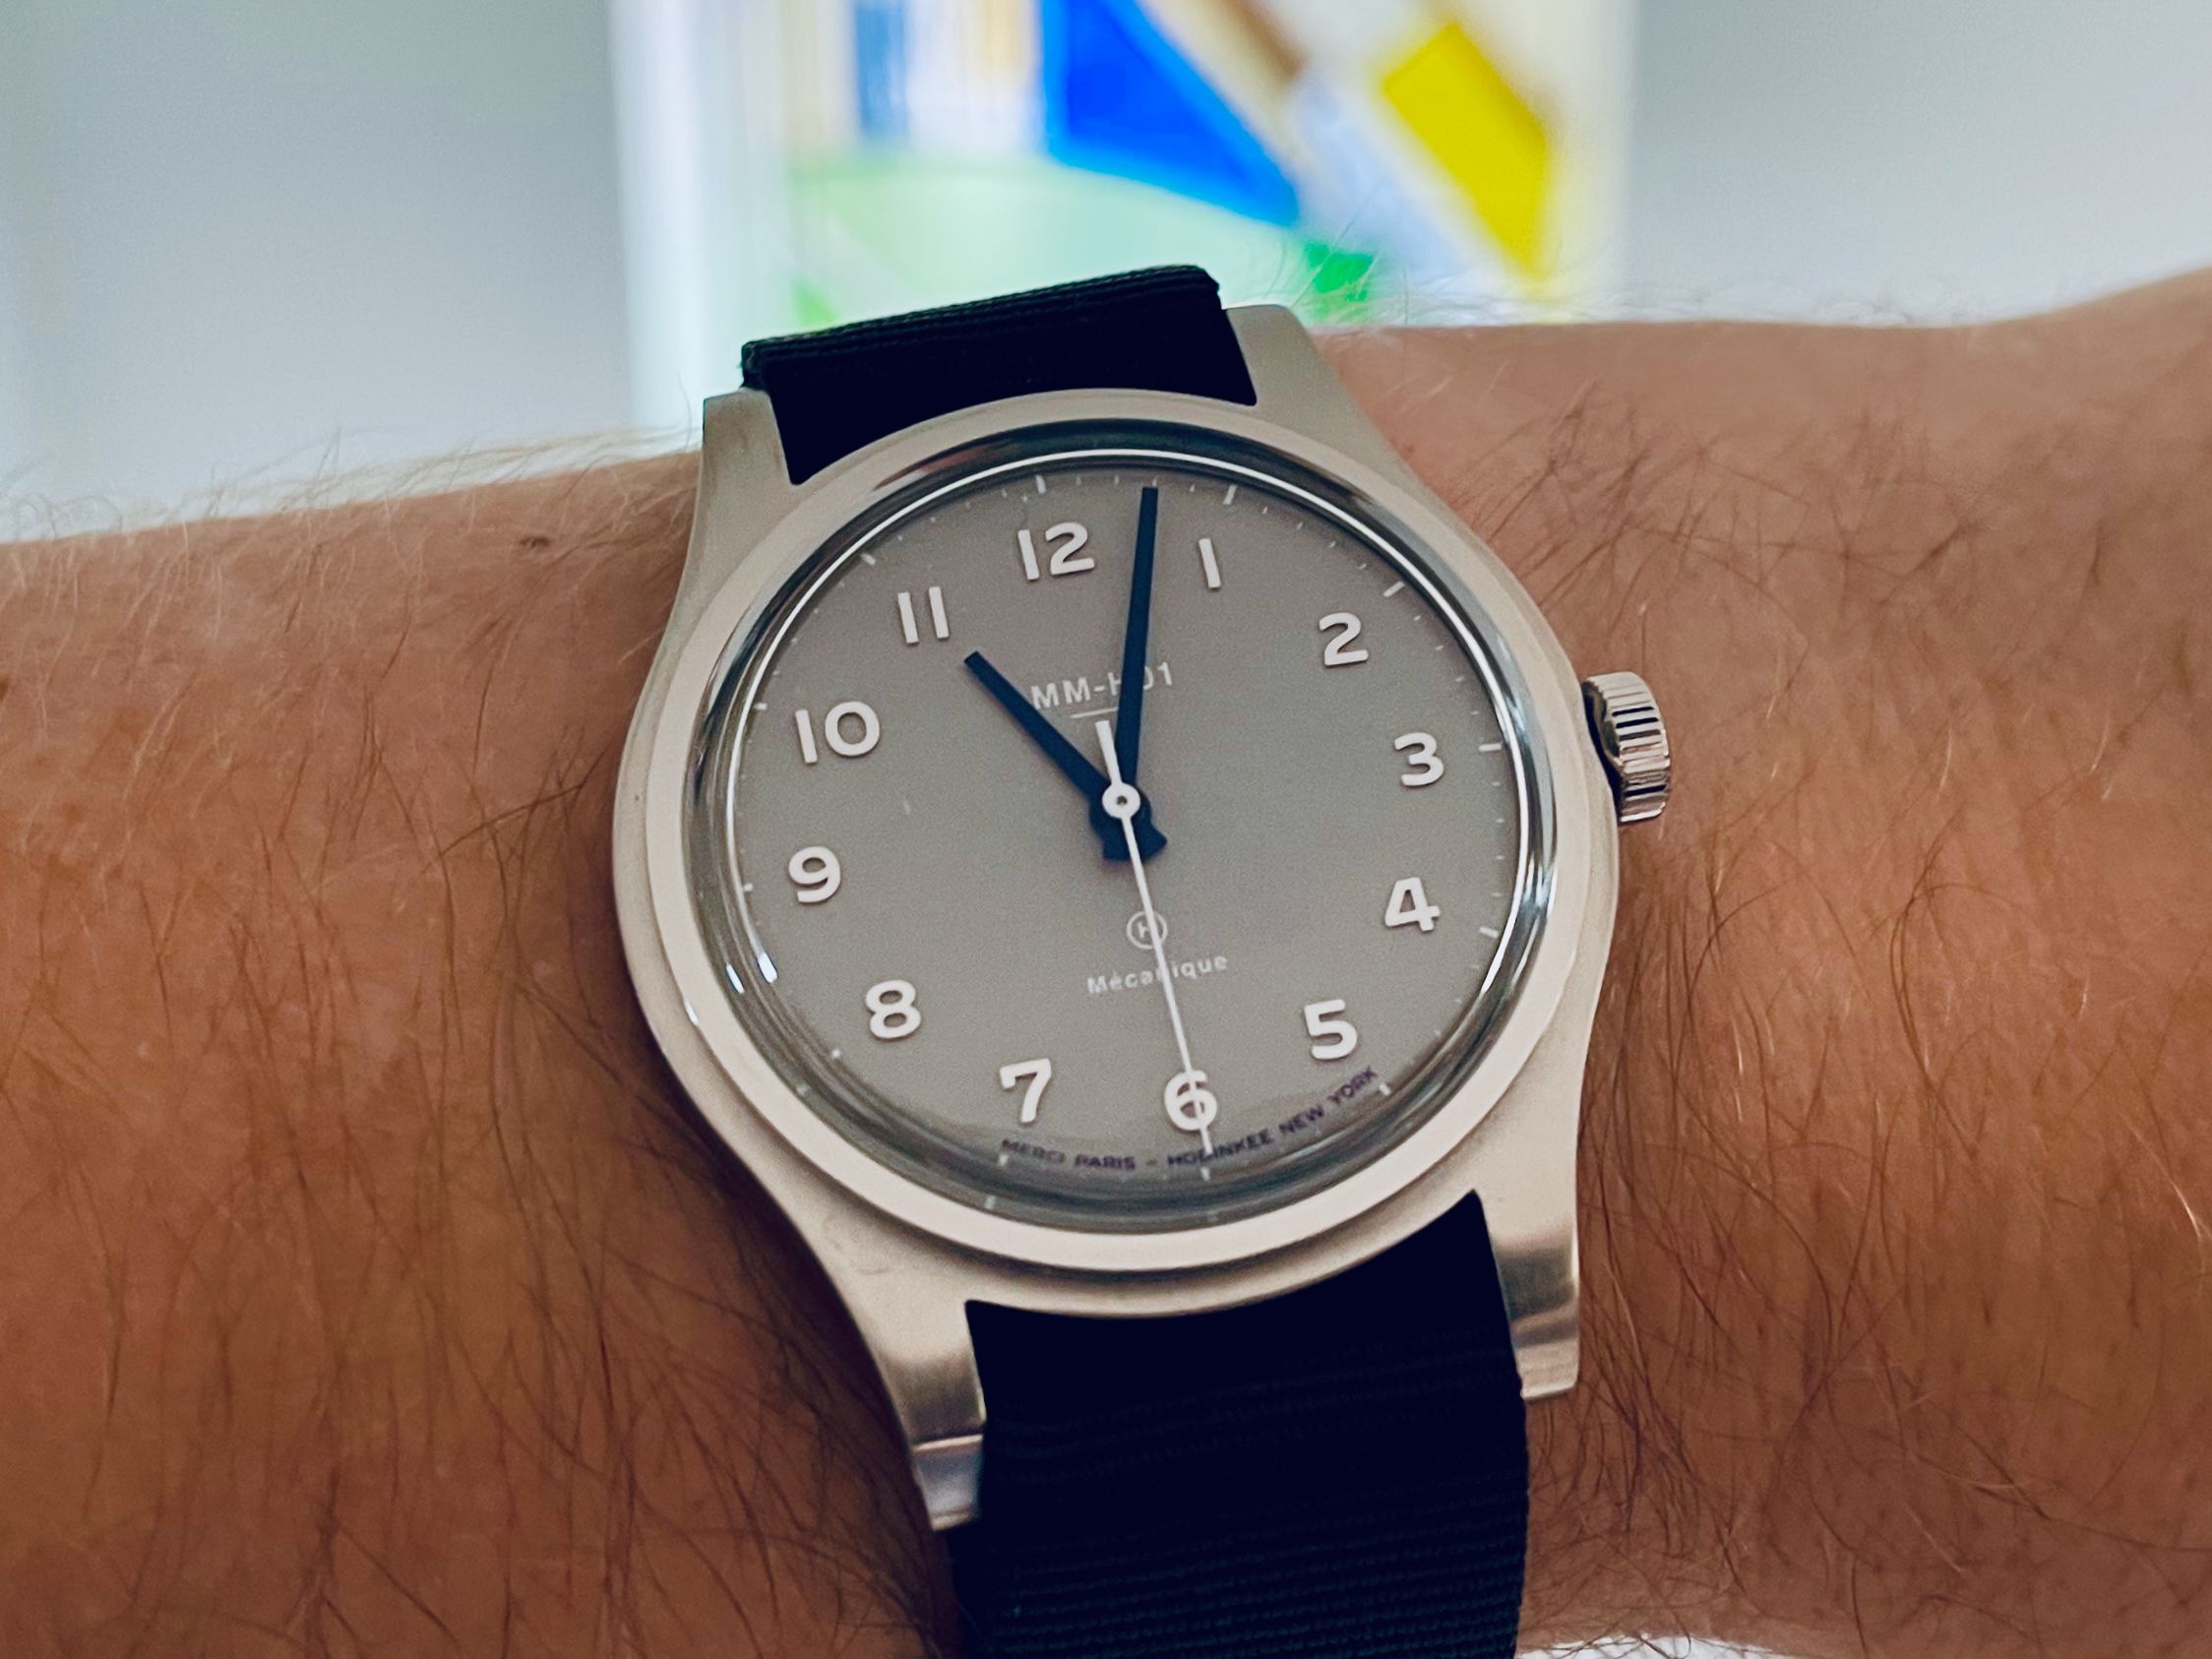 My Christmas present to me - the Hodinkee and Merci Paris colab.